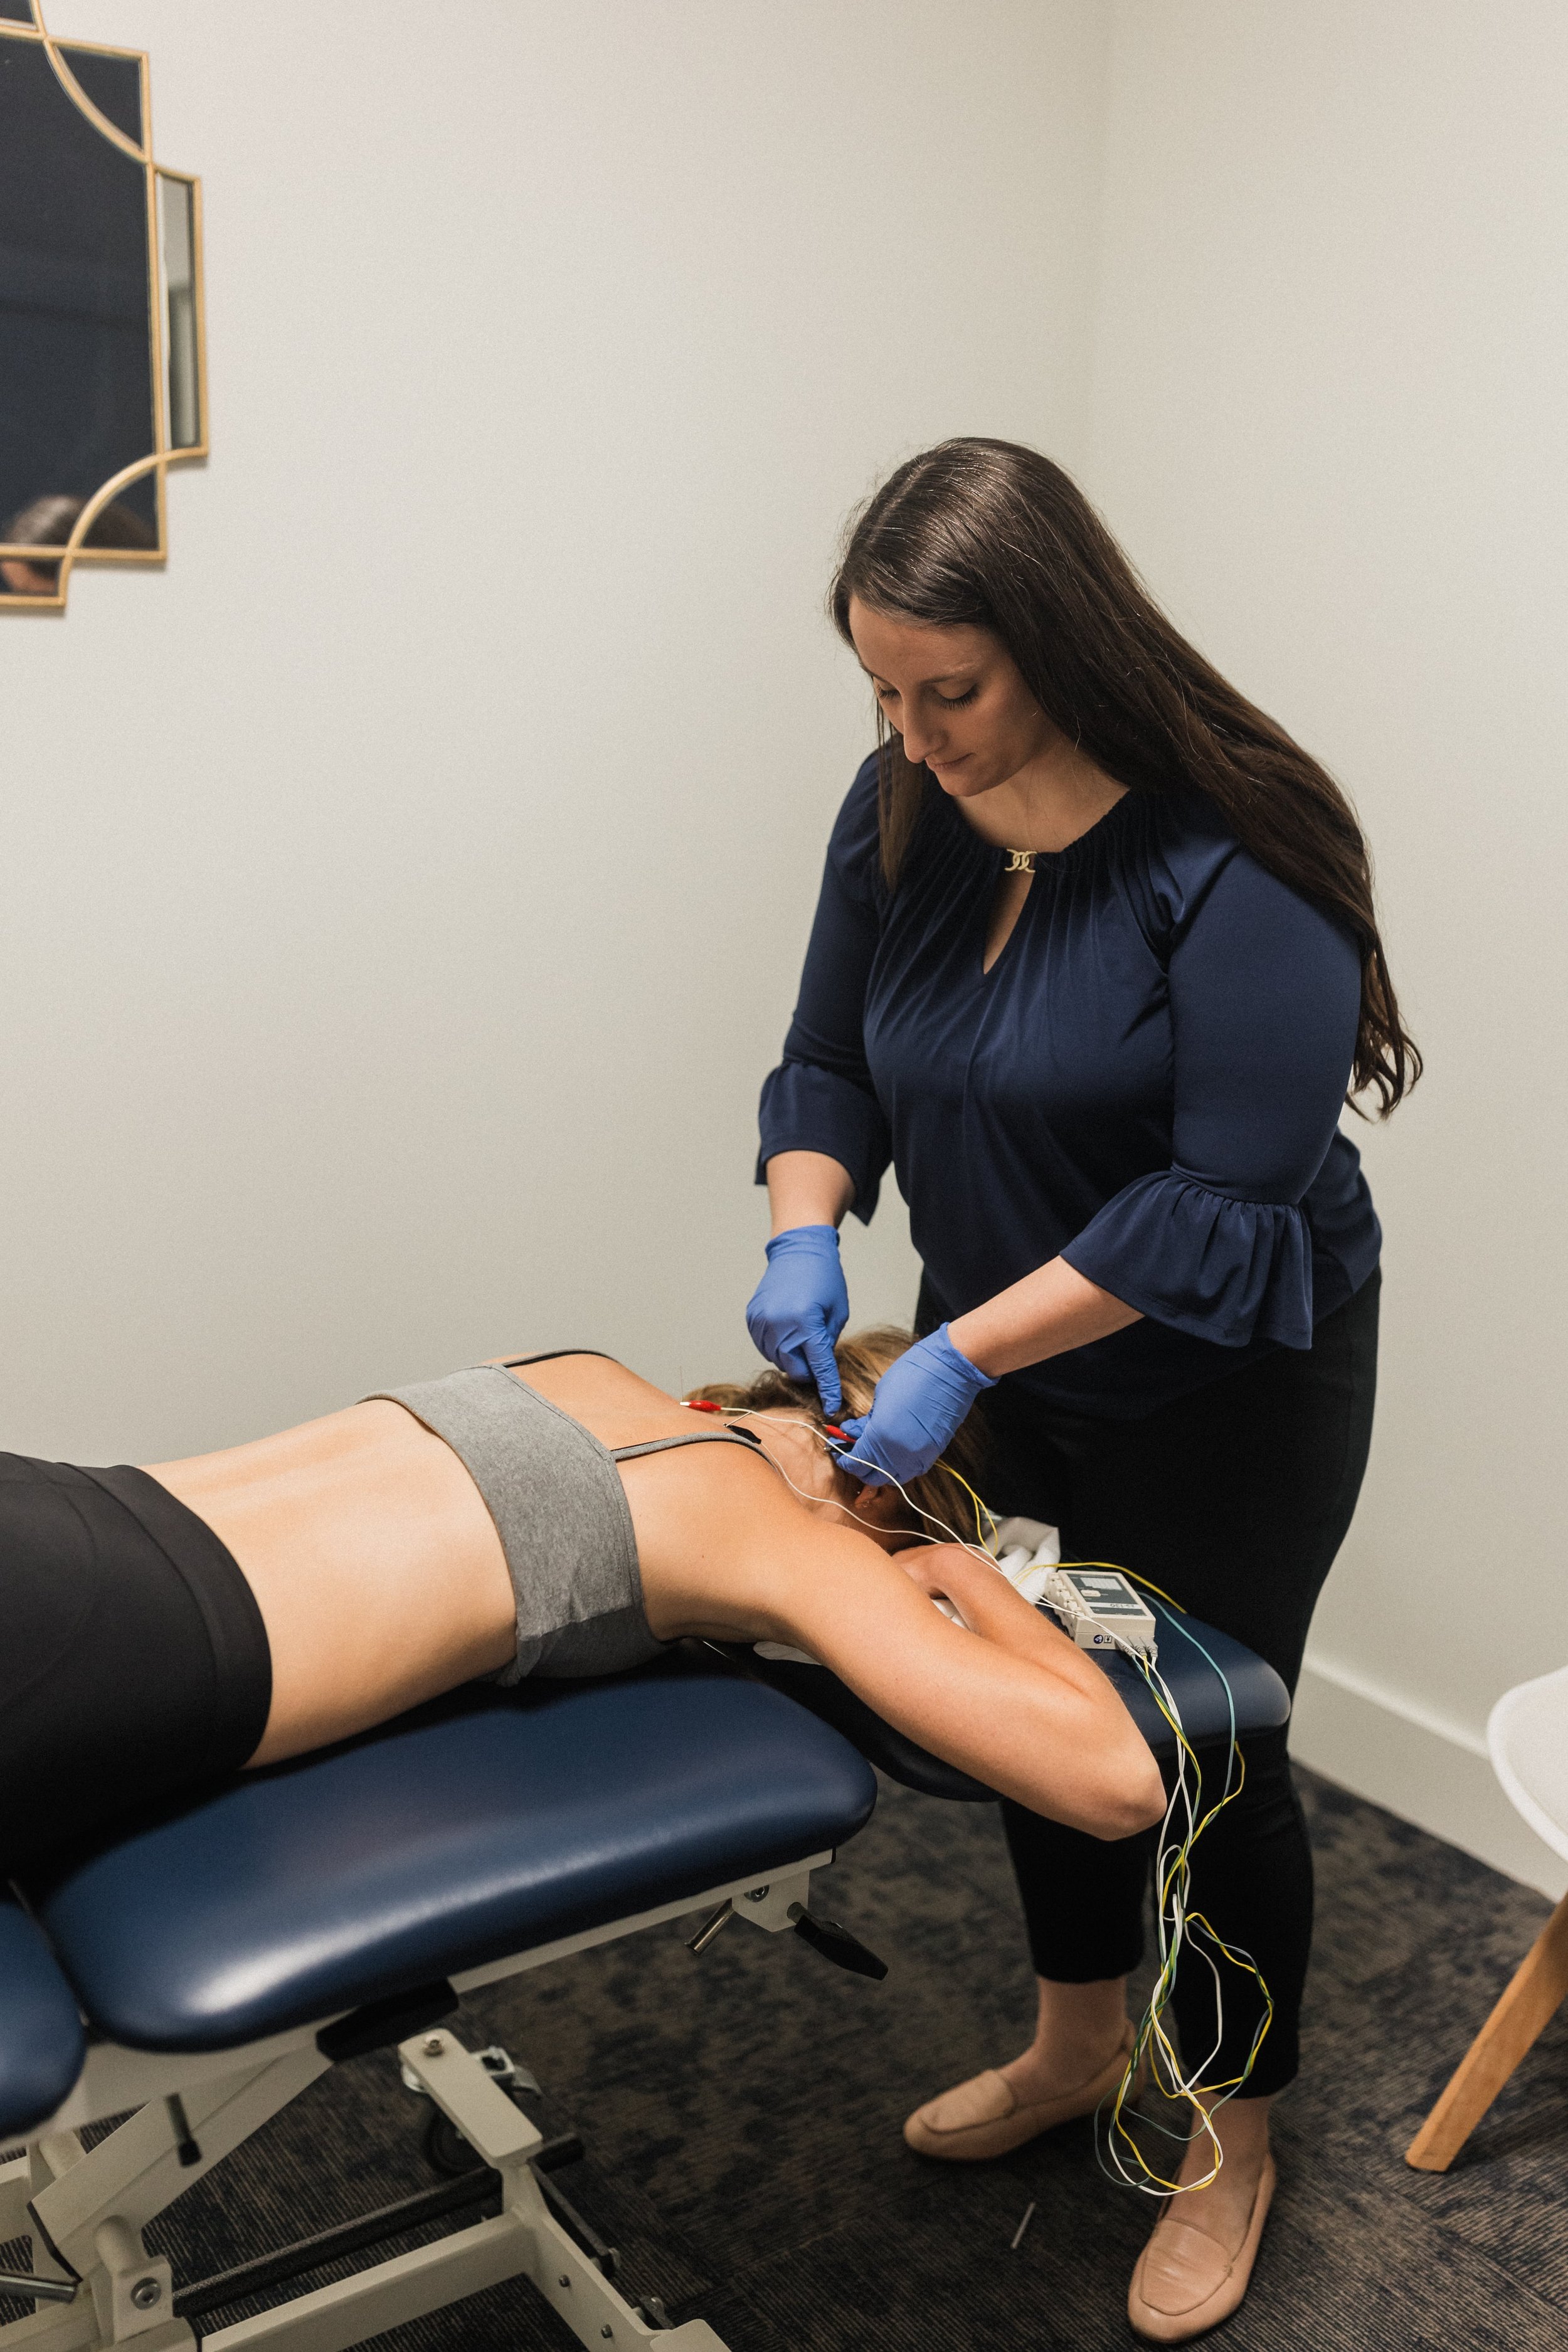 What You Need to Know About Dry Needling with Electrical Stimulation, Orthopedic Blog